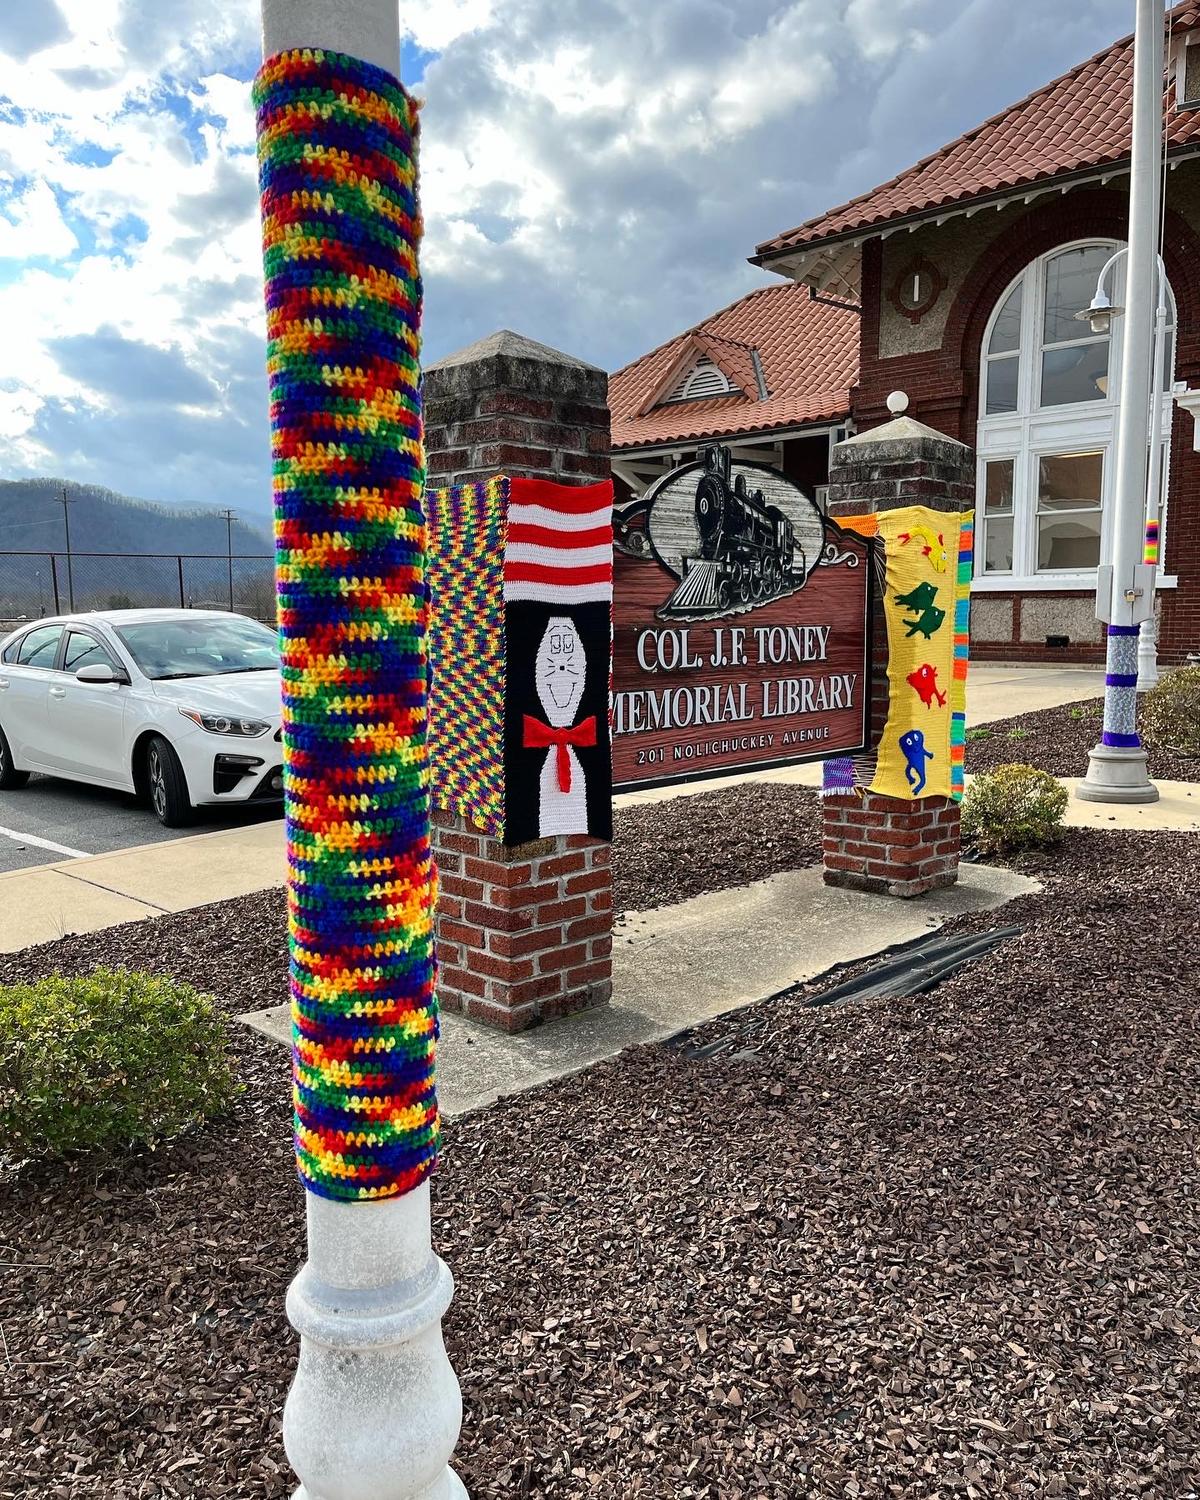 The Unicoi County Public Library organizes a “Yarn Bomb” event every March to celebrate National Read Across America Week, draping tree trunks, utility poles, and more with crocheted pieces. (Courtesy of Suzy Bomgardner)